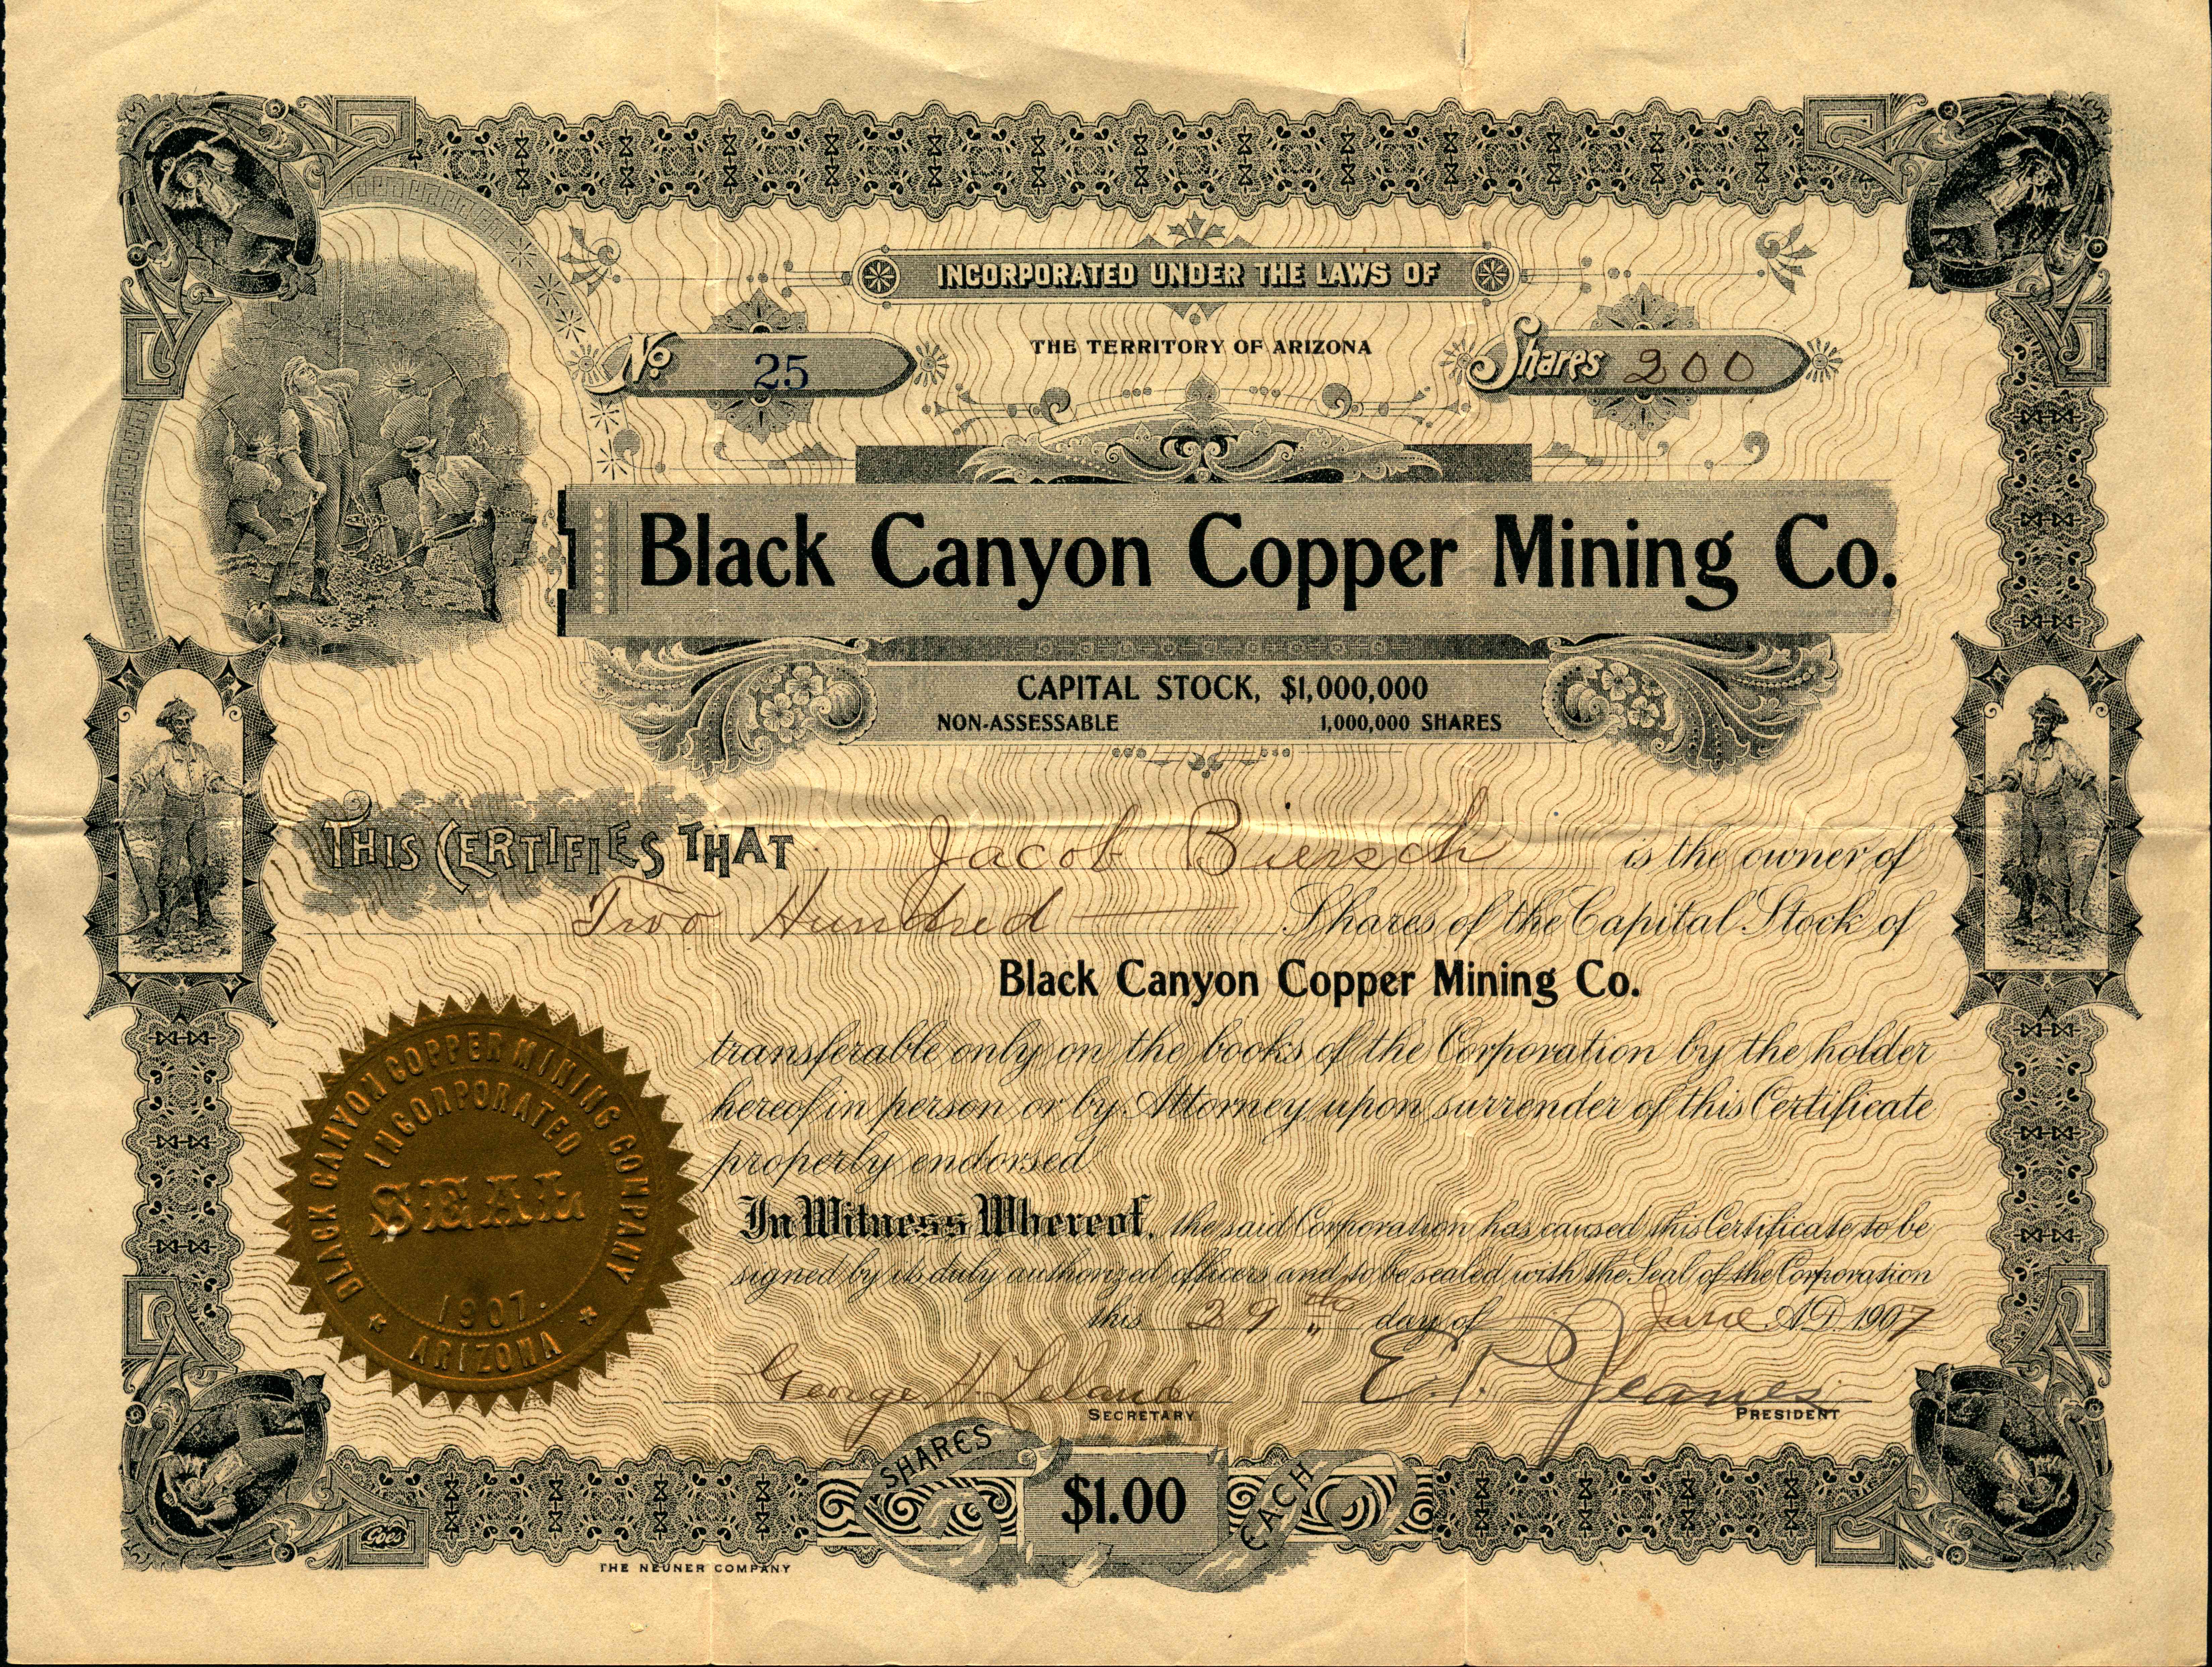 This certificate shows the stock and company information framed by vignettes of miners at work